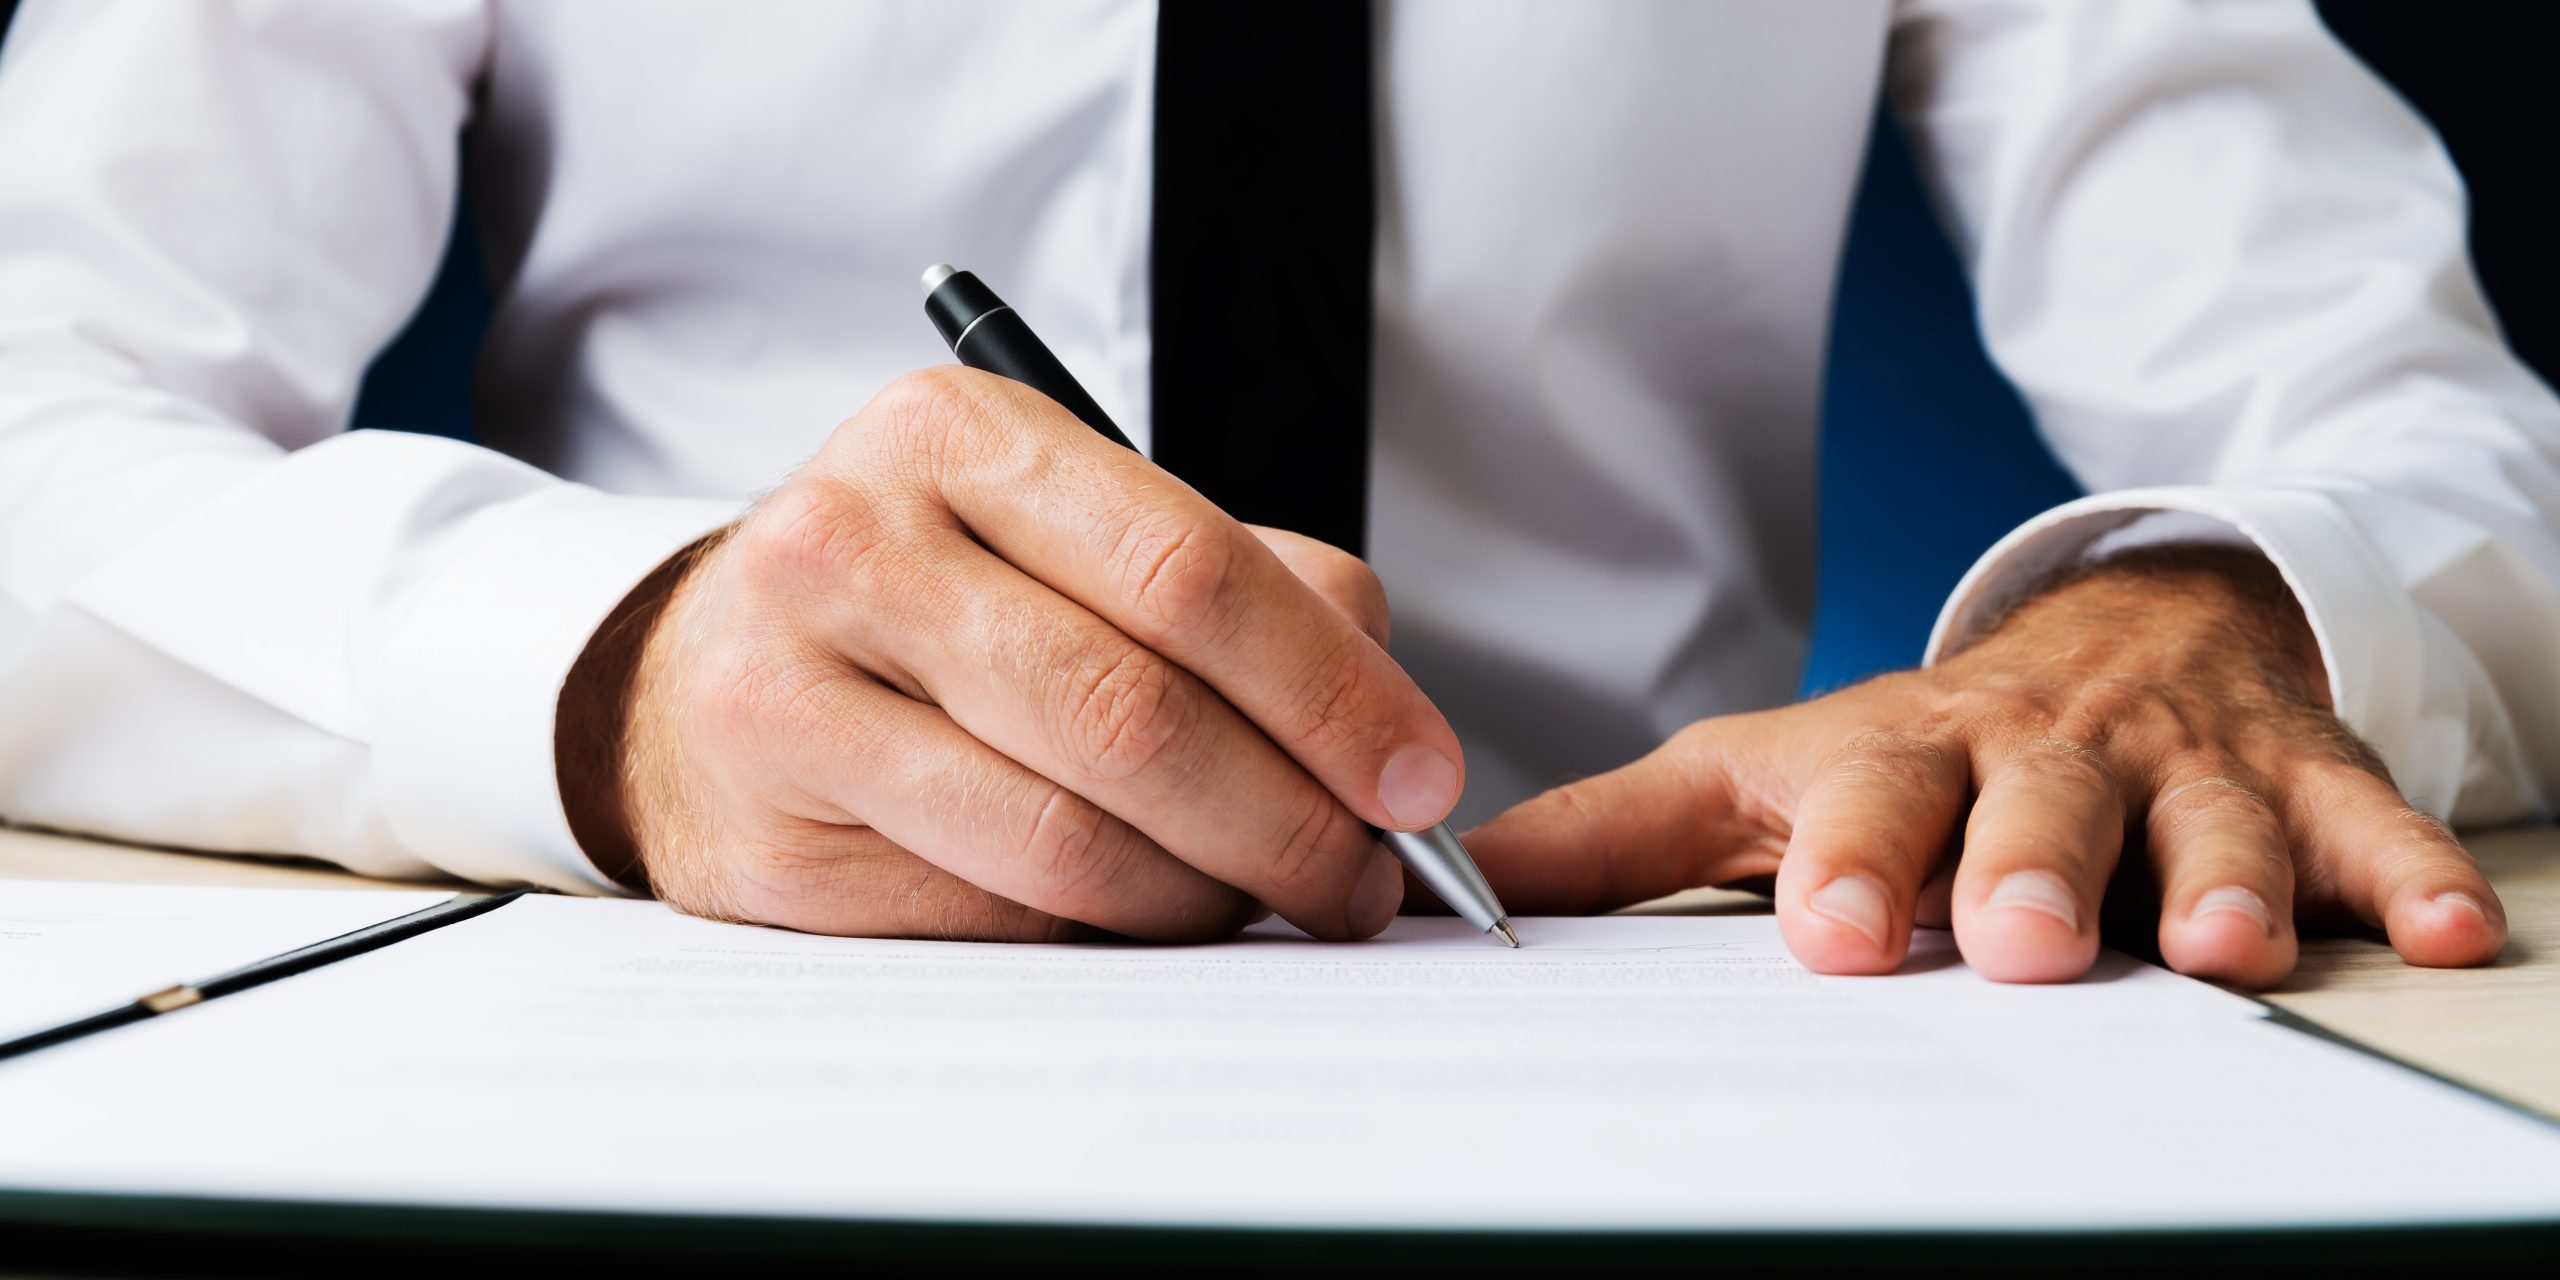 Wide view closeup image of businessman signing a document or contract.